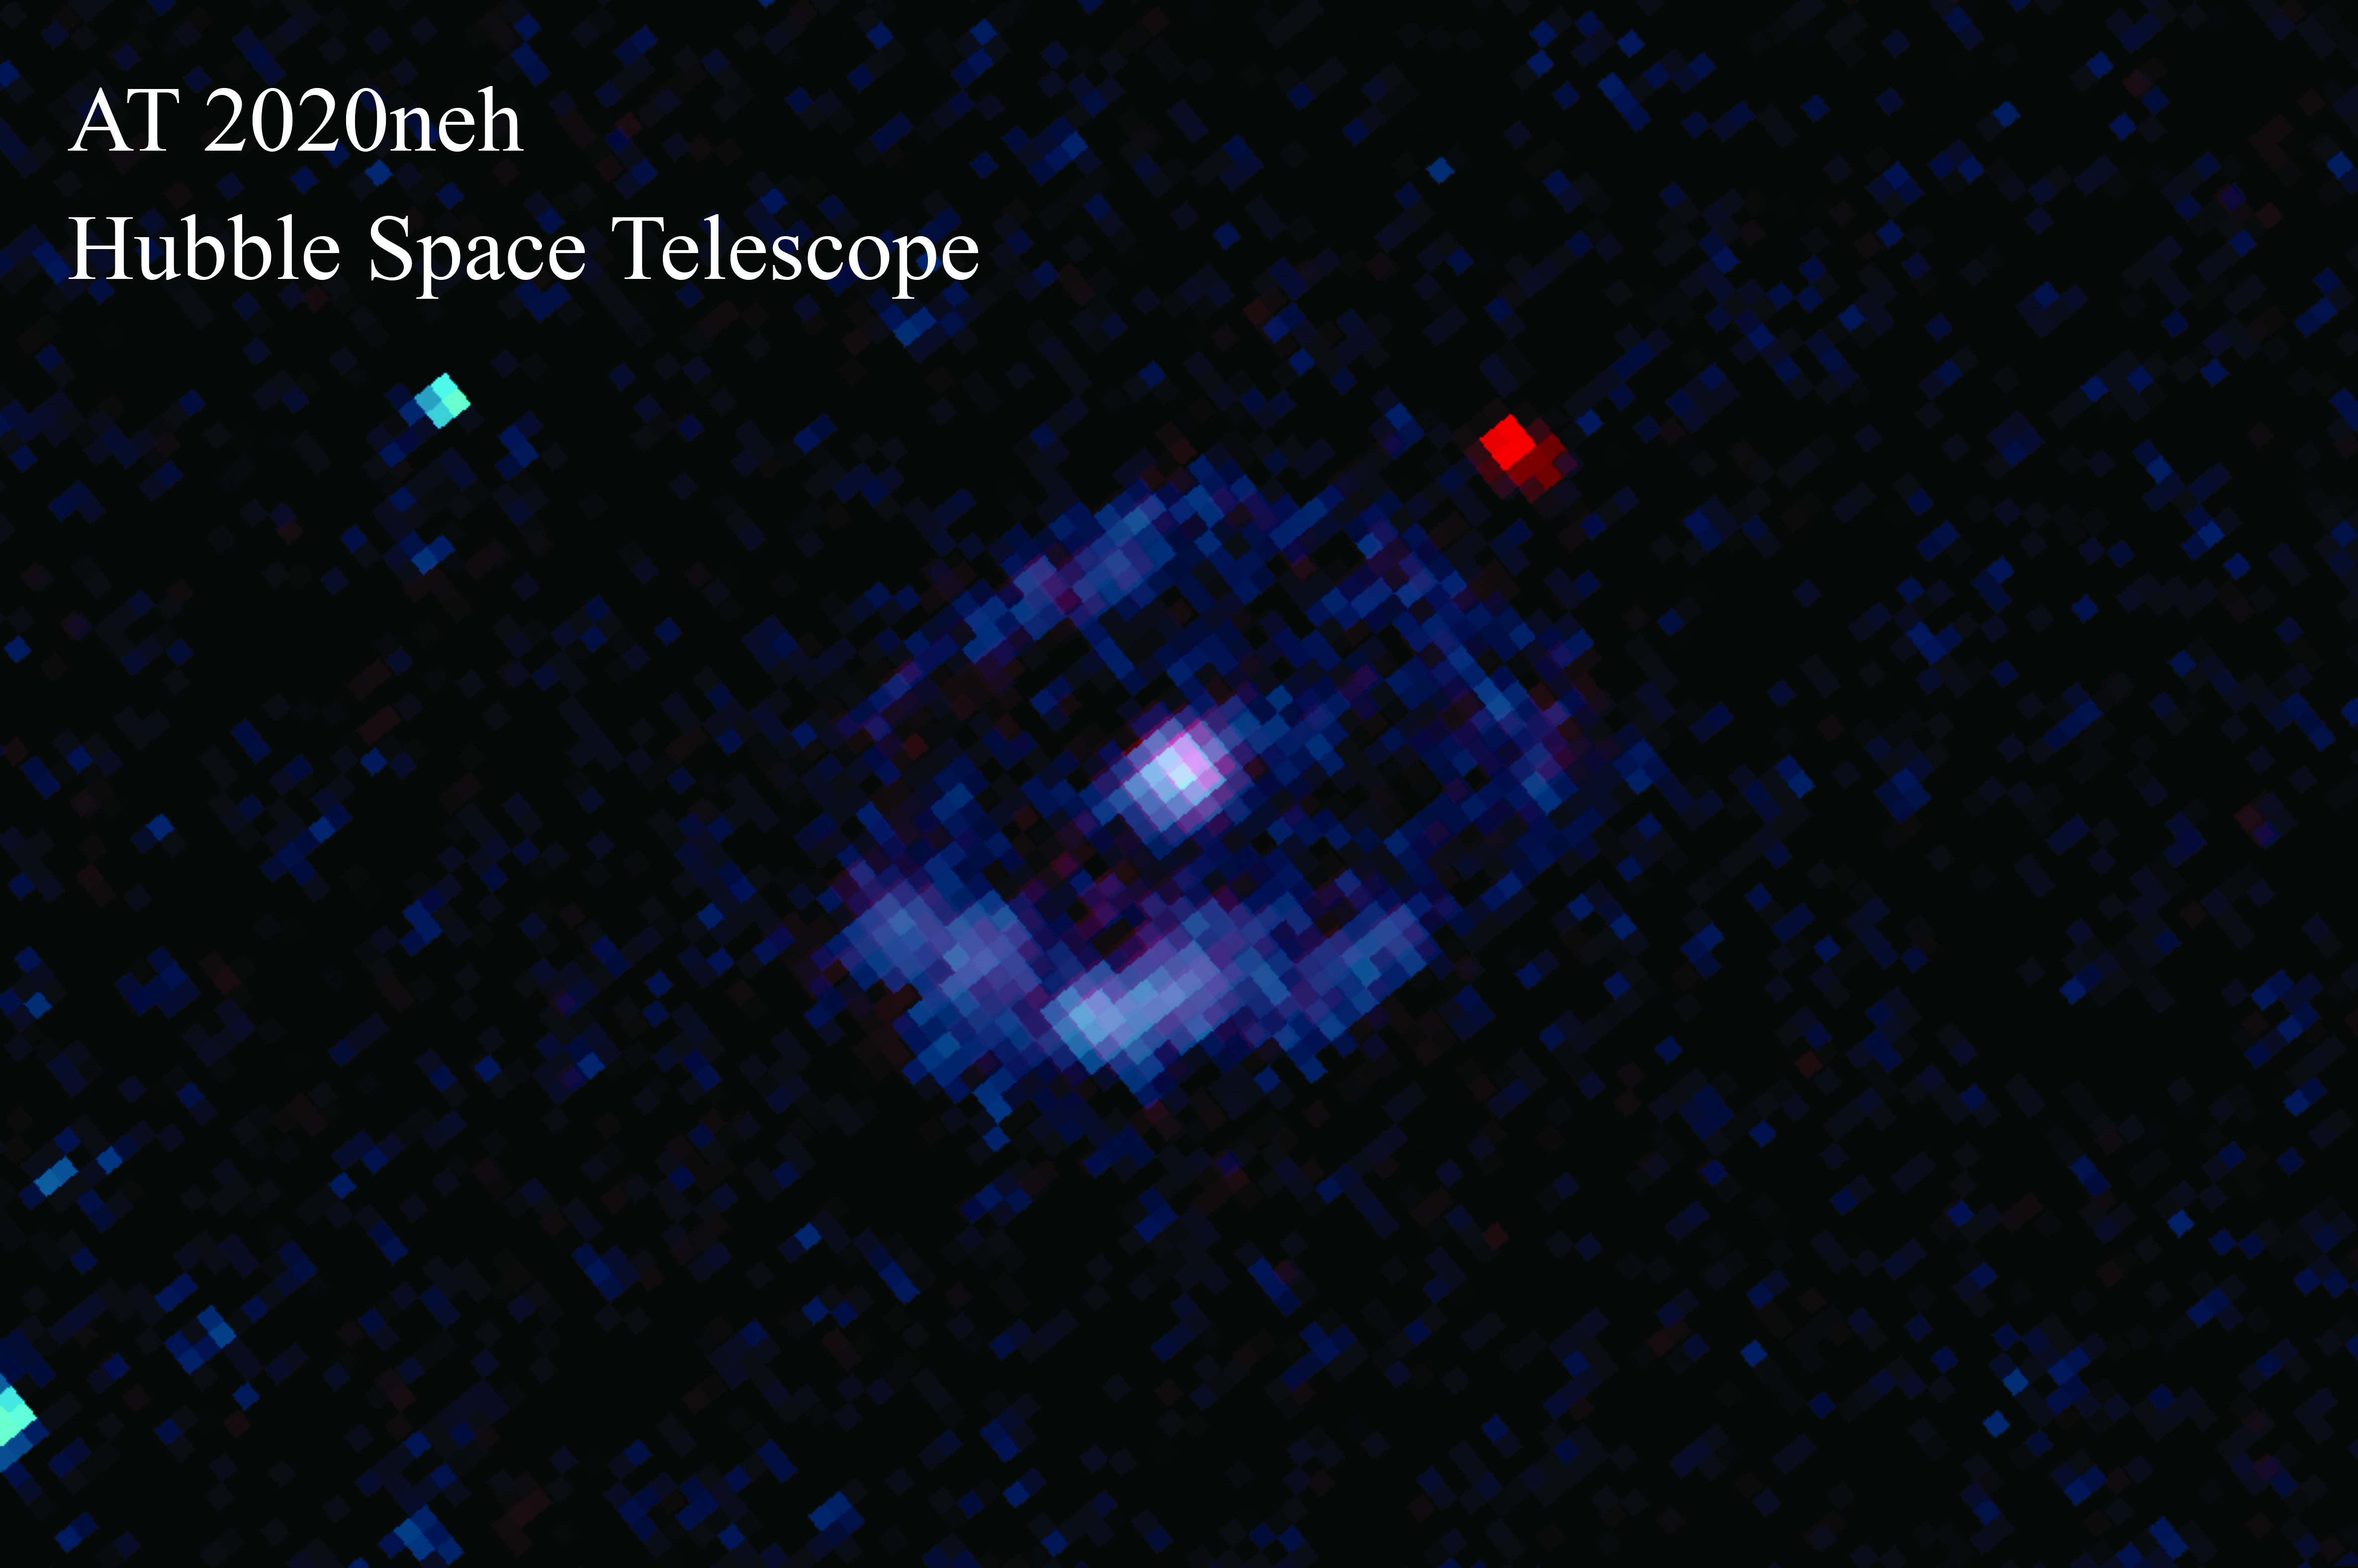 Astronomers have discovered a star torn apart by a black hole in the galaxy SDSS J152120.07 + 140410.5, 850 million light-years away.  The researchers pointed to NASA's Hubble Space Telescope to examine the impacts, called AT 2020neh, which is shown in the center of the image.  Hubble's ultraviolet camera saw a ring of stars forming around the galactic core where AT 2020neh is located.